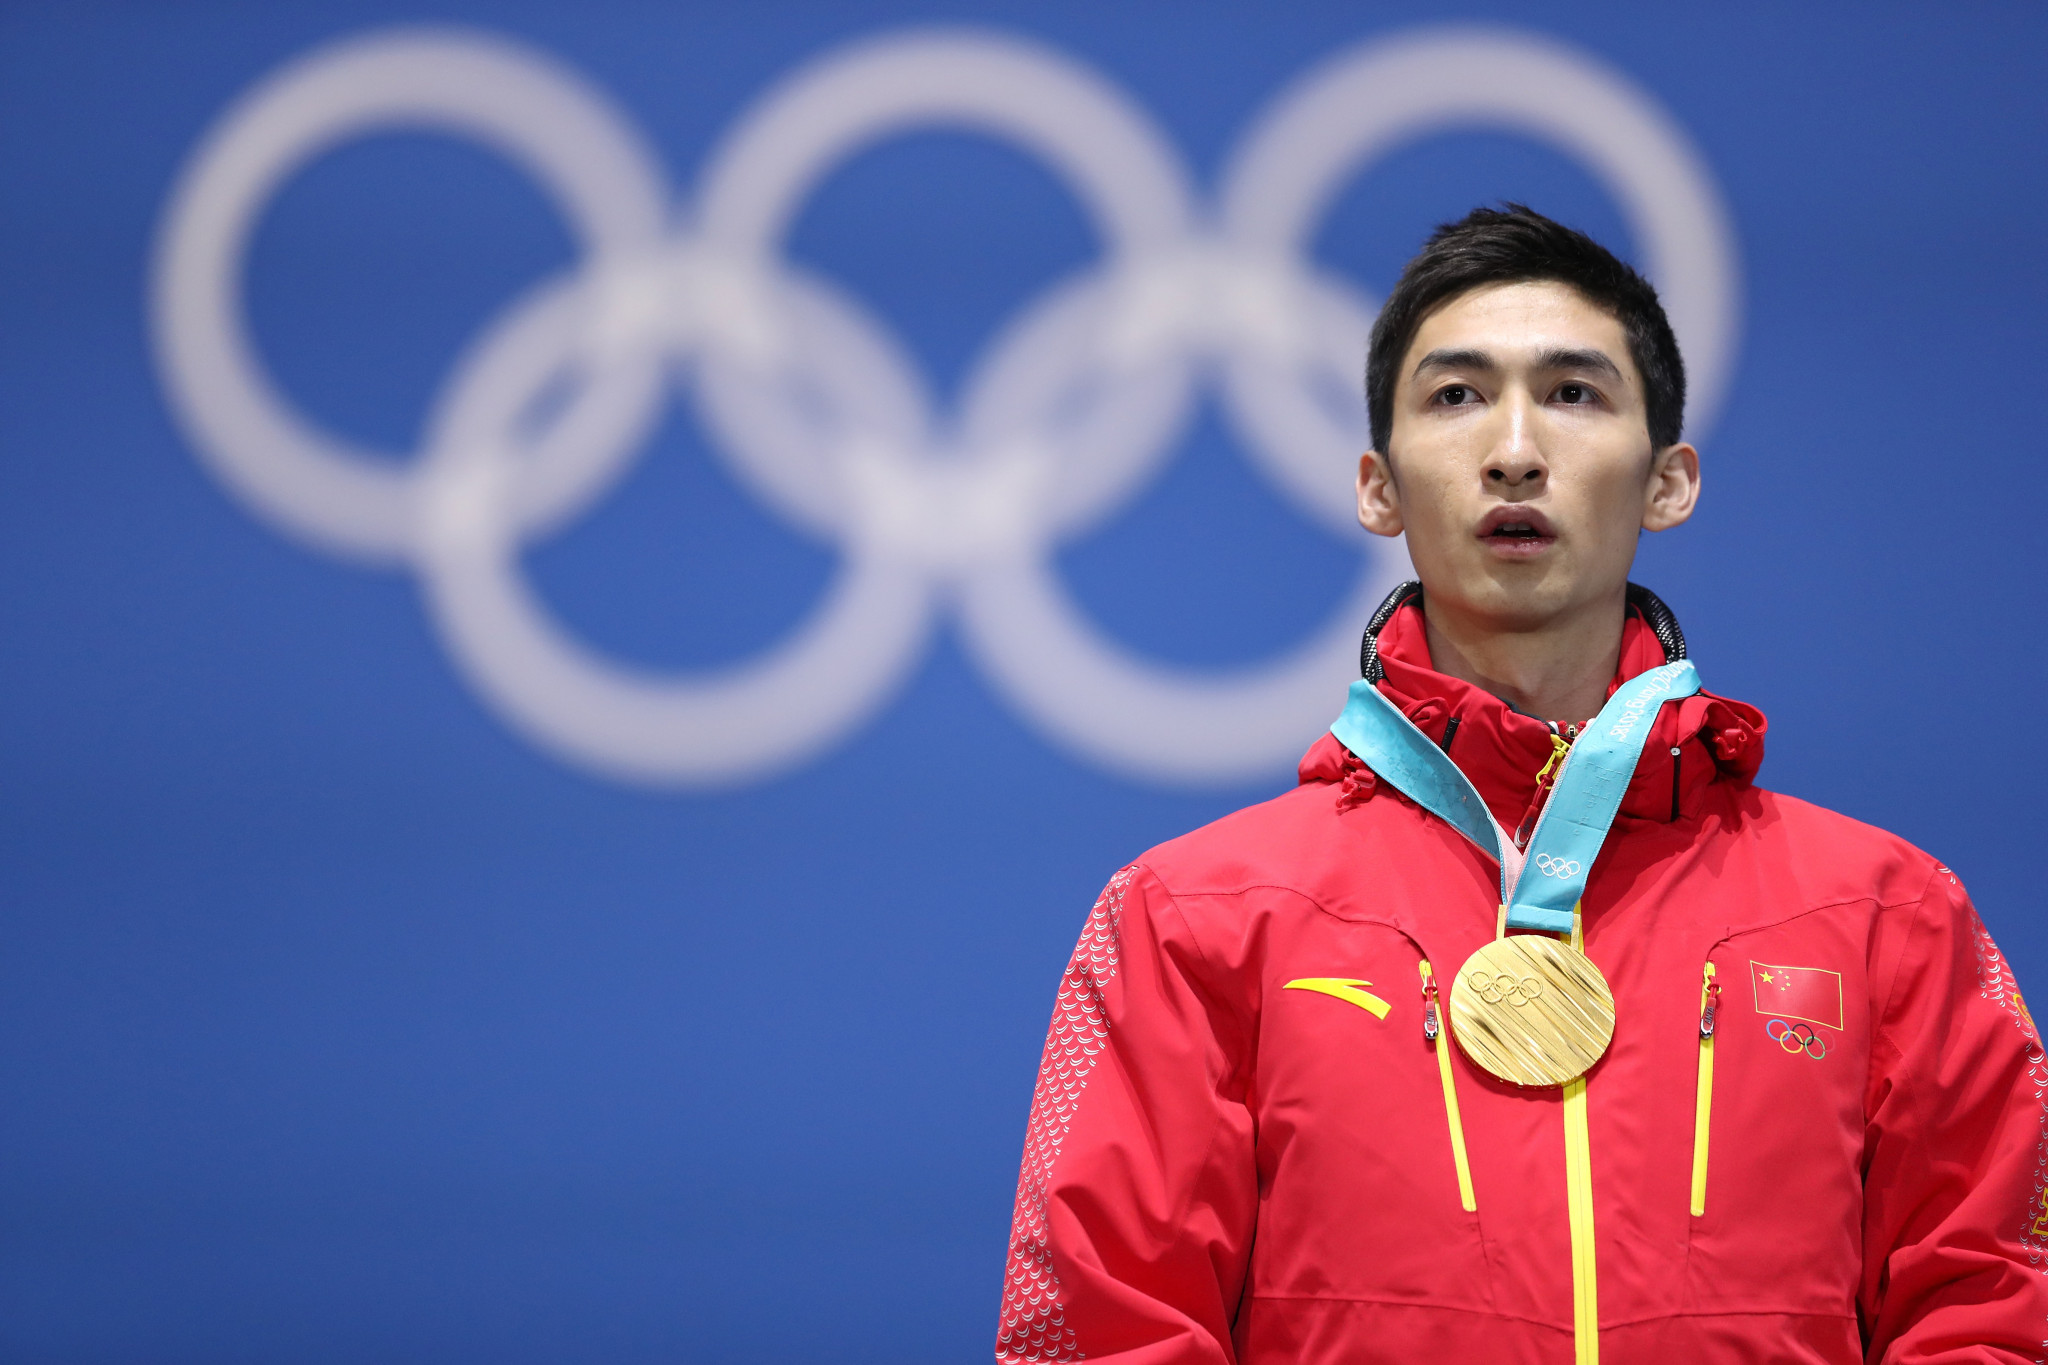 Wu Dajing was China's sole gold medallist at Pyeongchang 2018 ©Getty Images